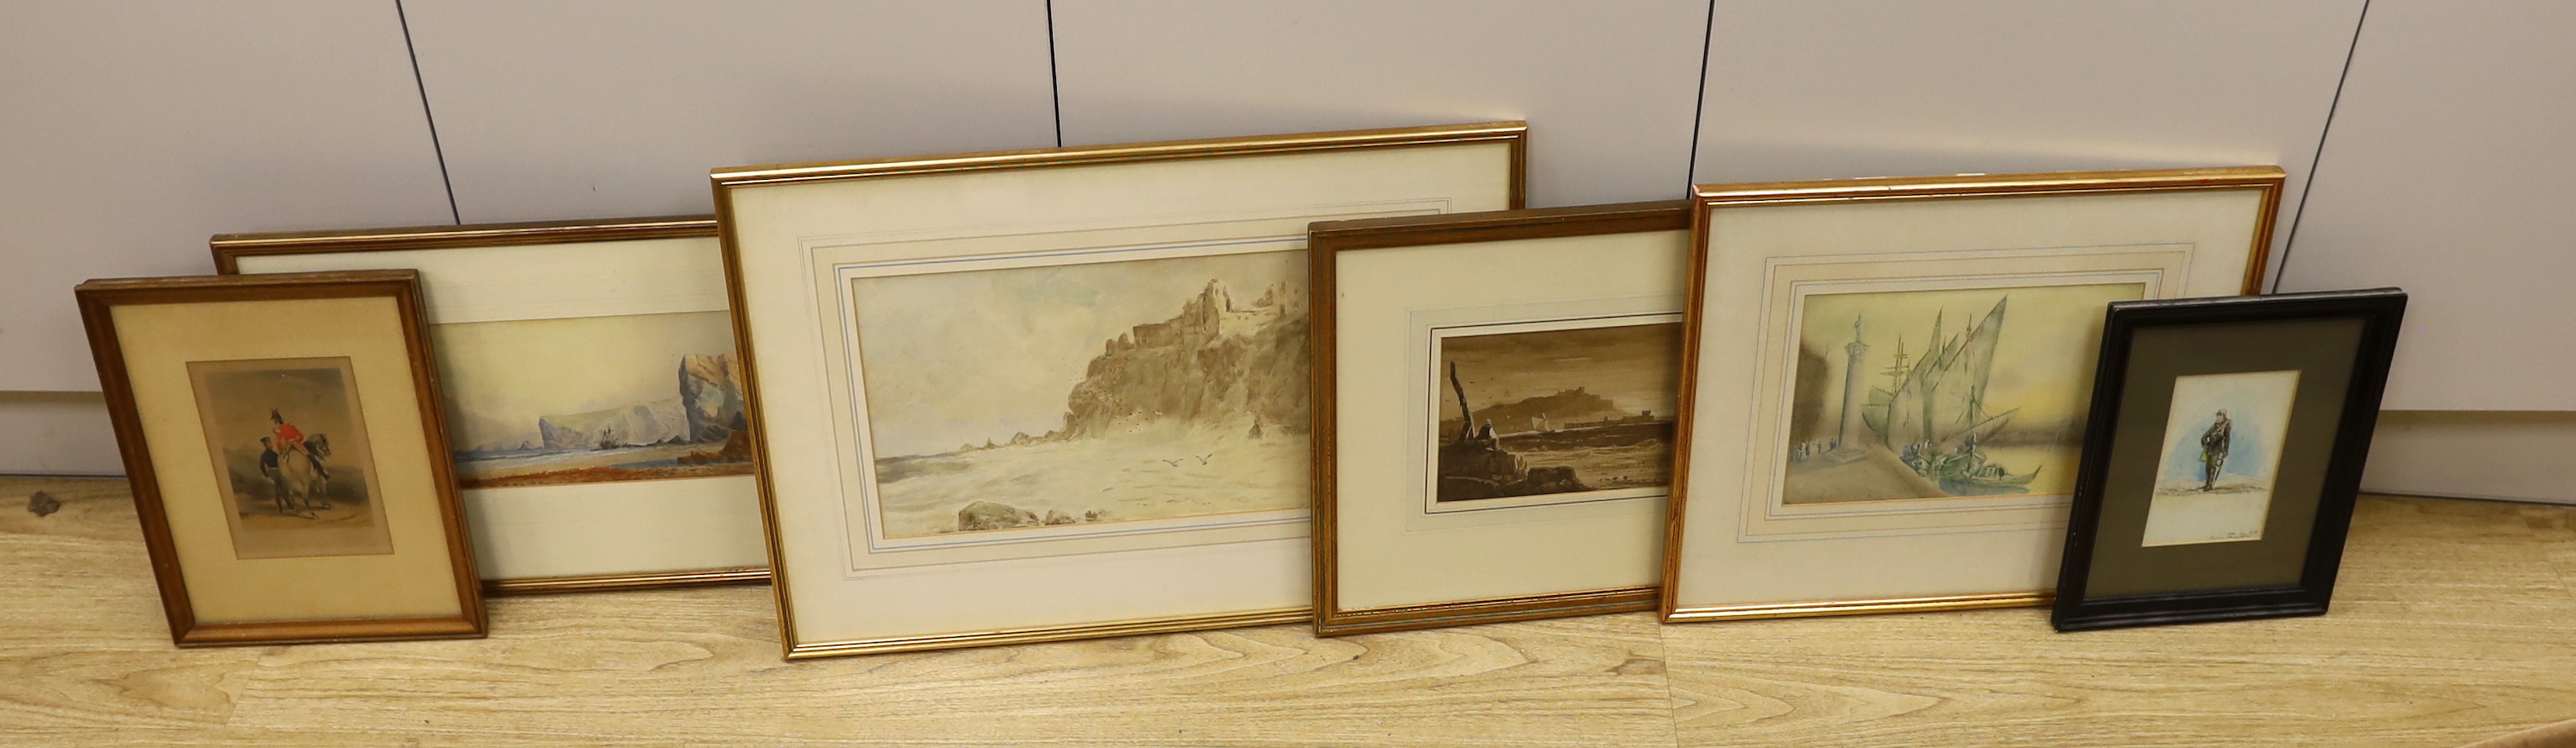 Six watercolours and prints including Frederick C. Jackson (fl.1868-1884), watercolour, 'Near Kynance Cove', attributed to Samuel Prout (1783-1852), sepia watercolour and a pen and ink sketch of an army officer, largest